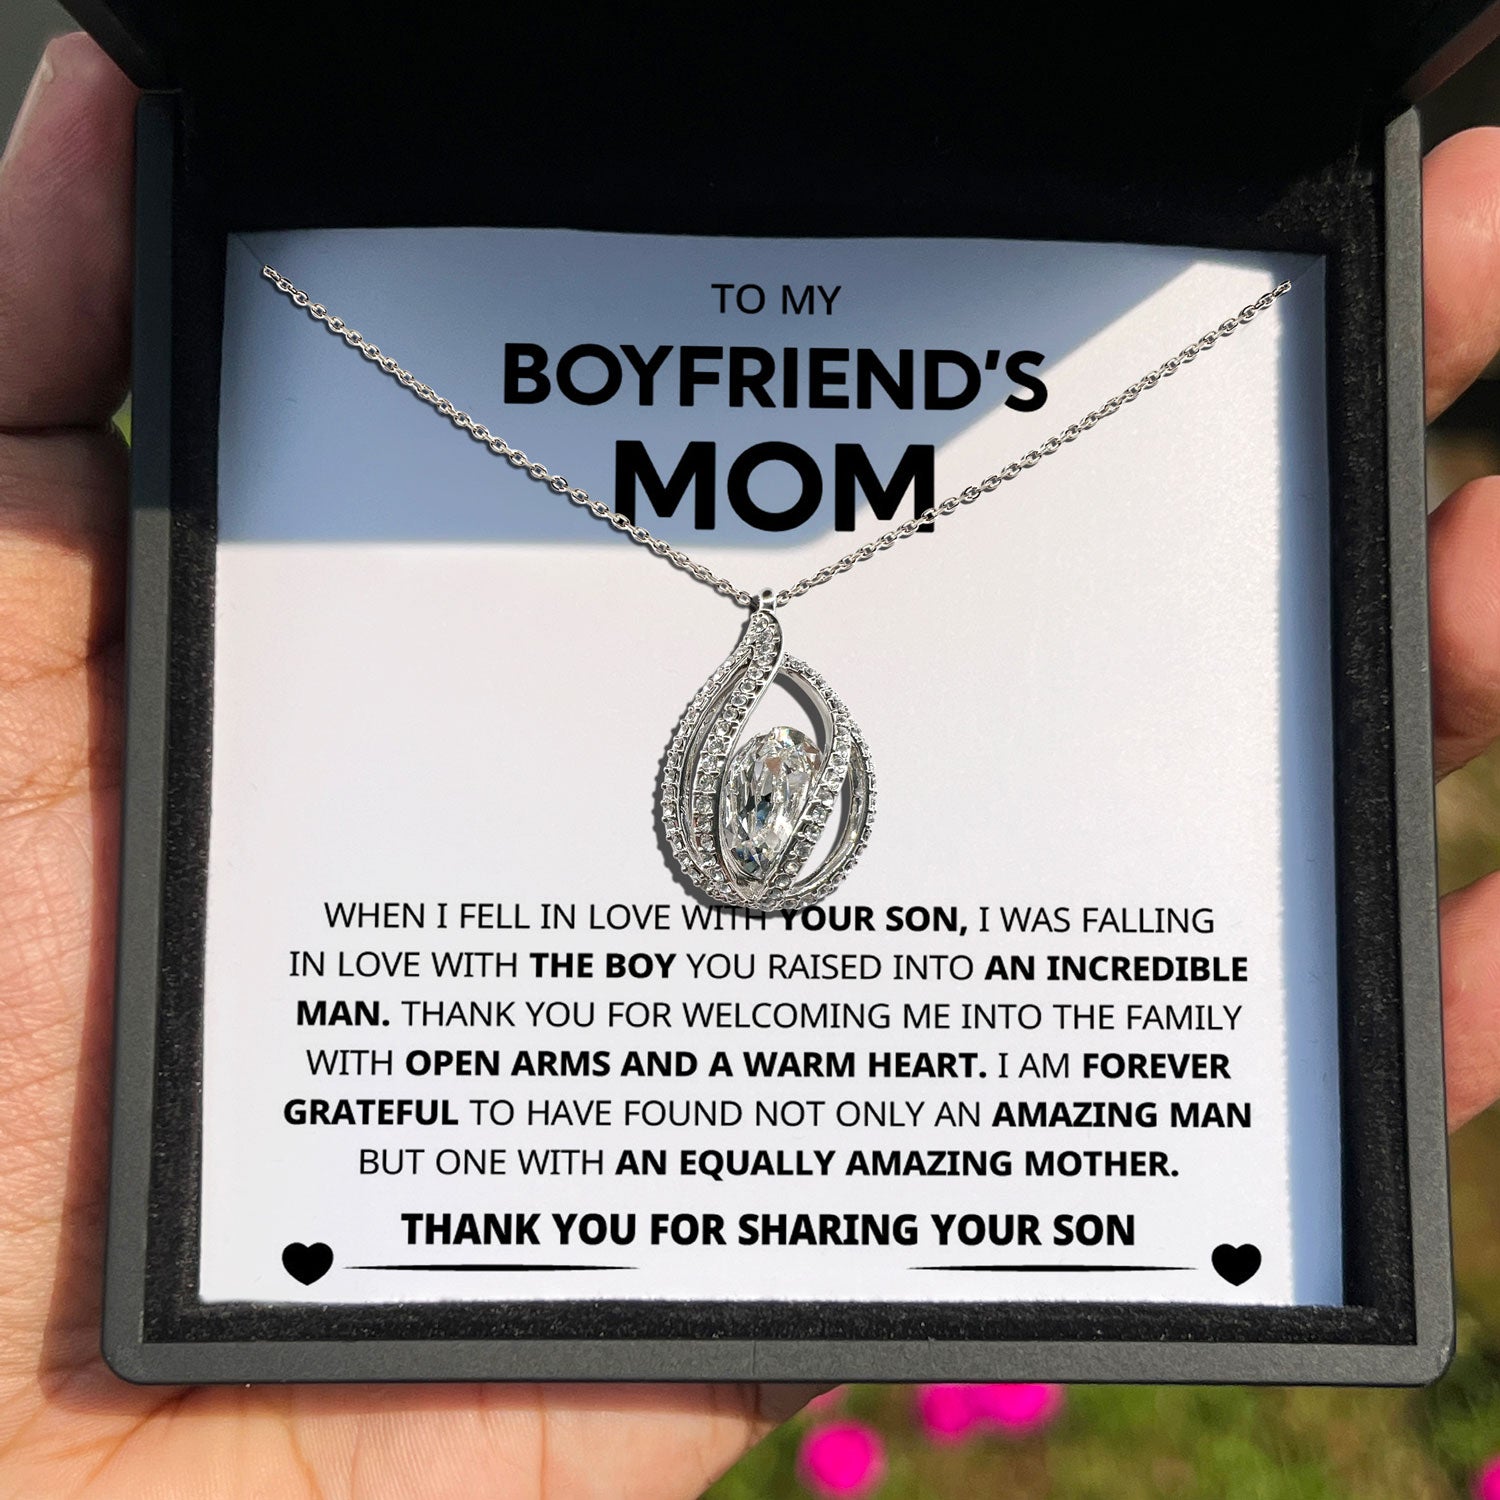 To My Boyfriend's Mom - The Family With Open Arms And a Warm Heart - Orbital Birdcage Necklace